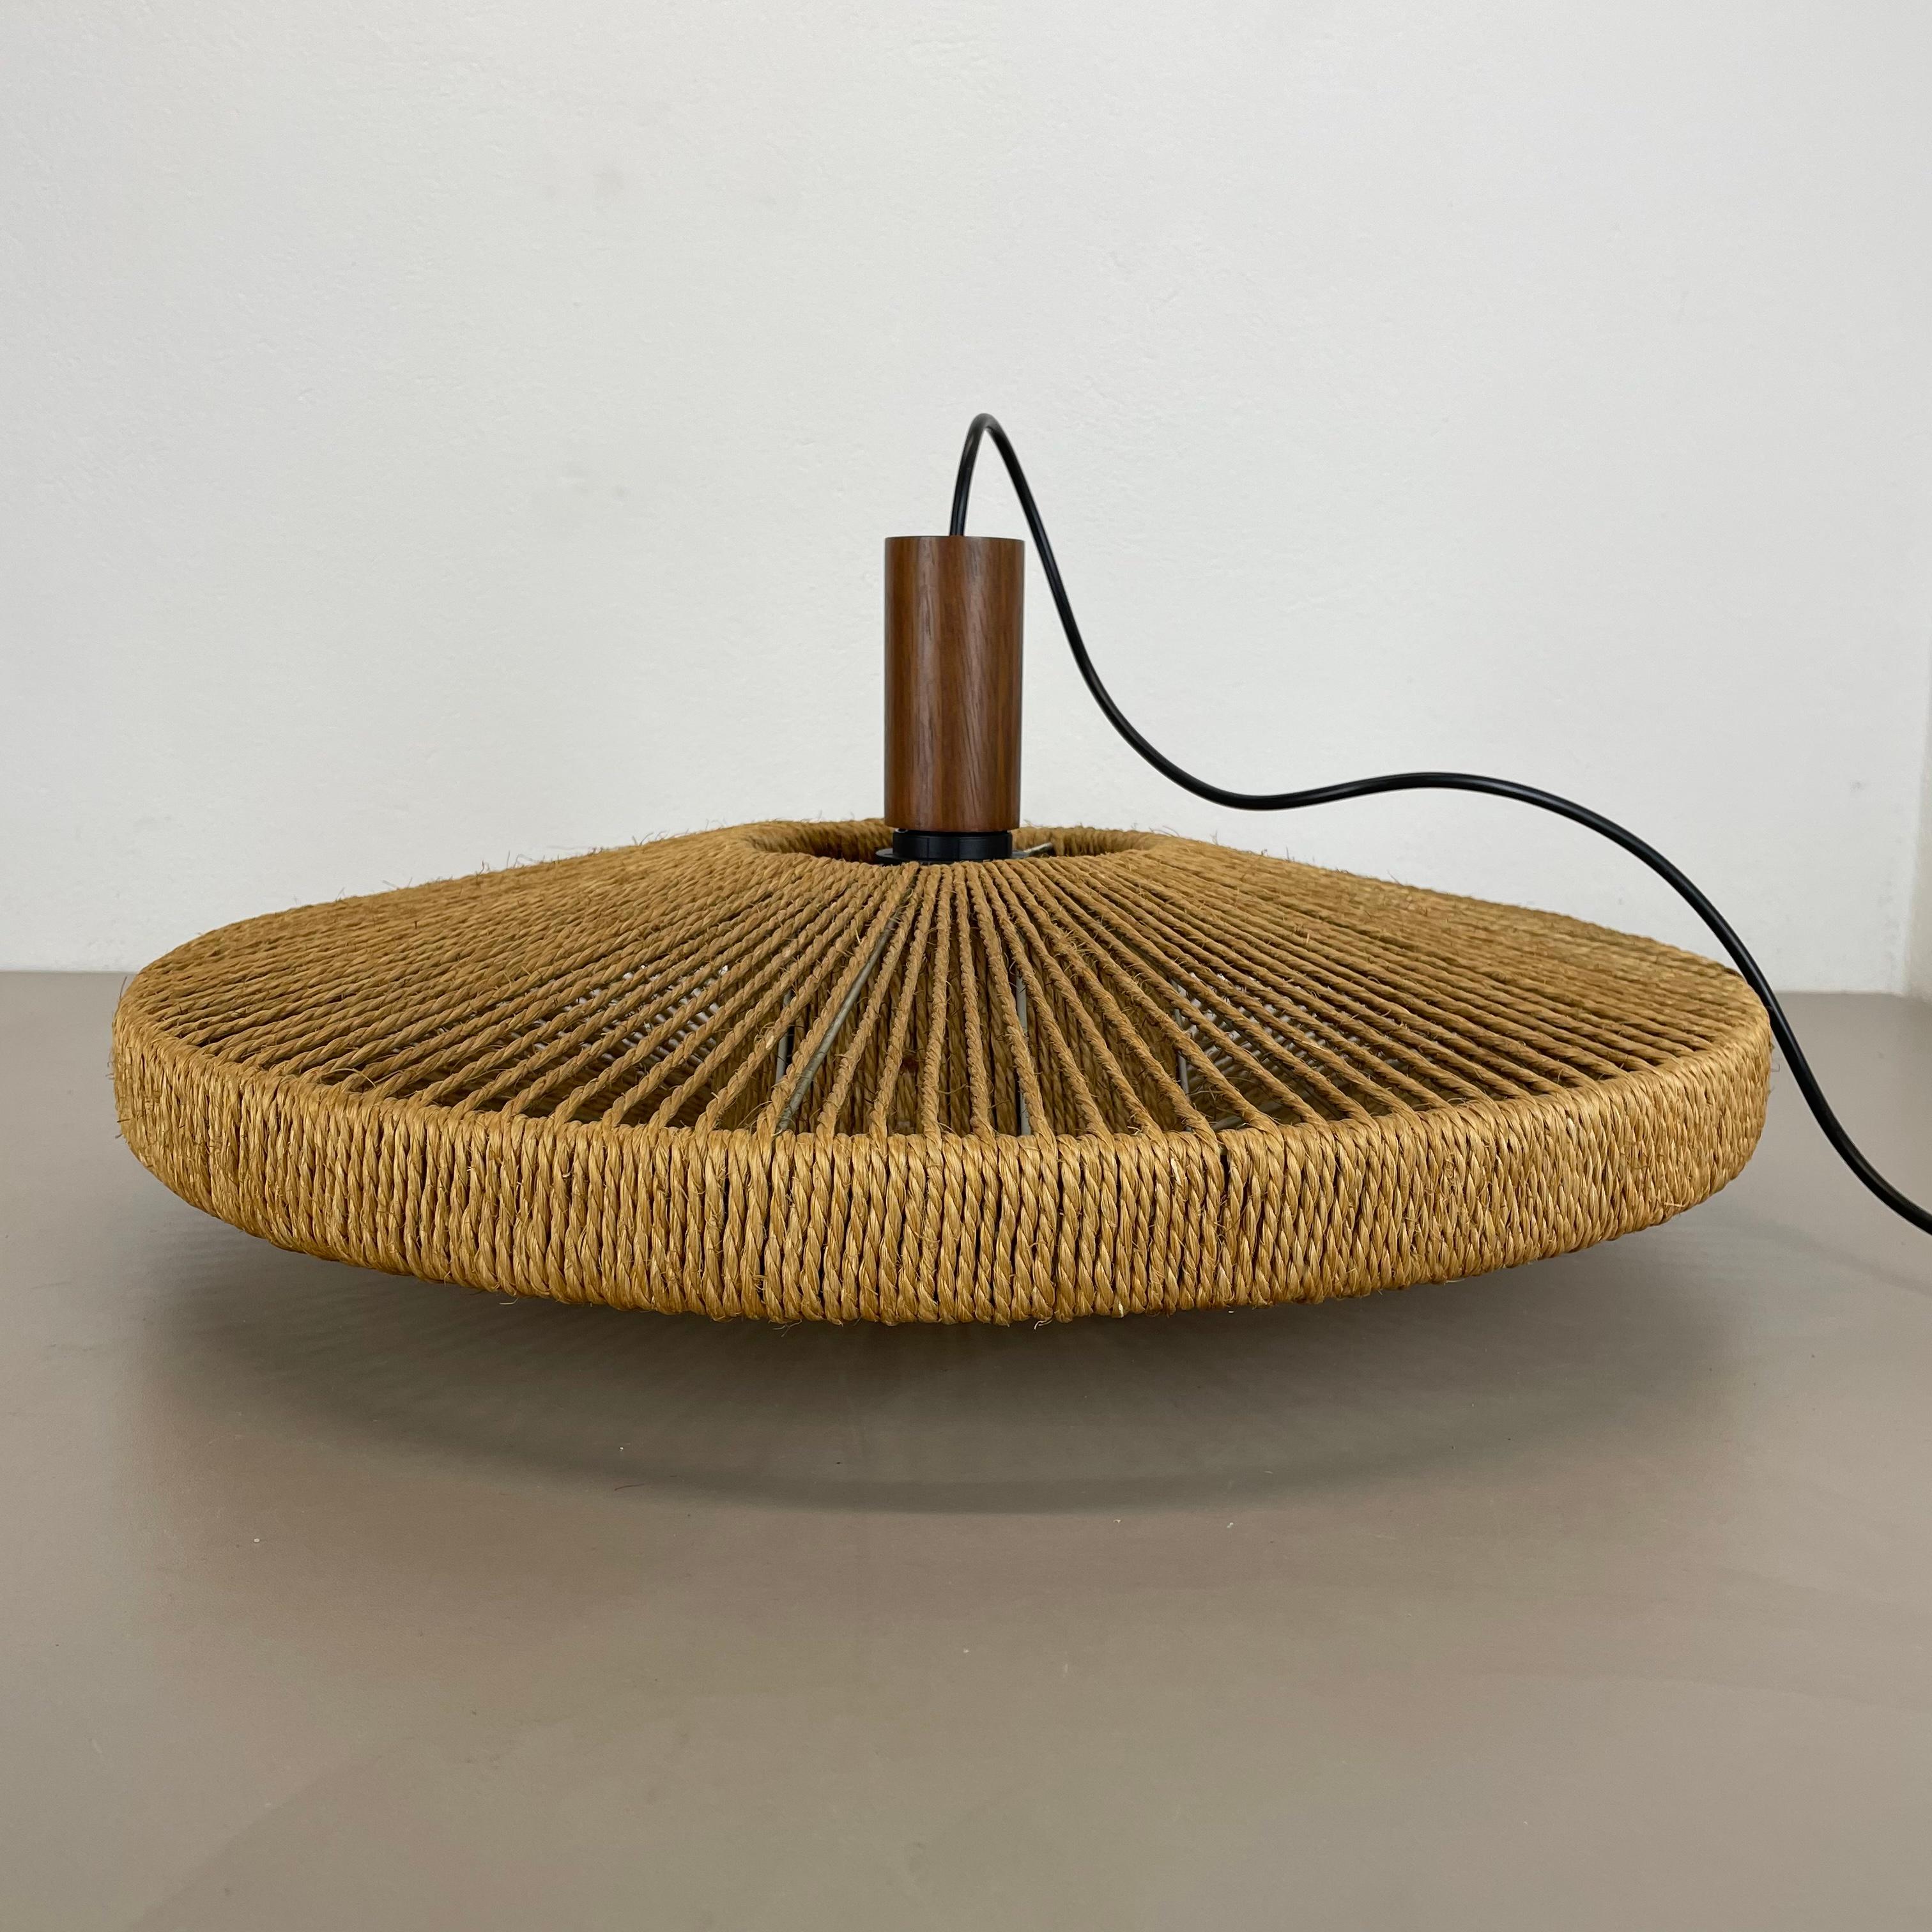 56cm Organic Sisal and Teak Ufo Hanging Light Made by Temde Lights Germany 1960s For Sale 12